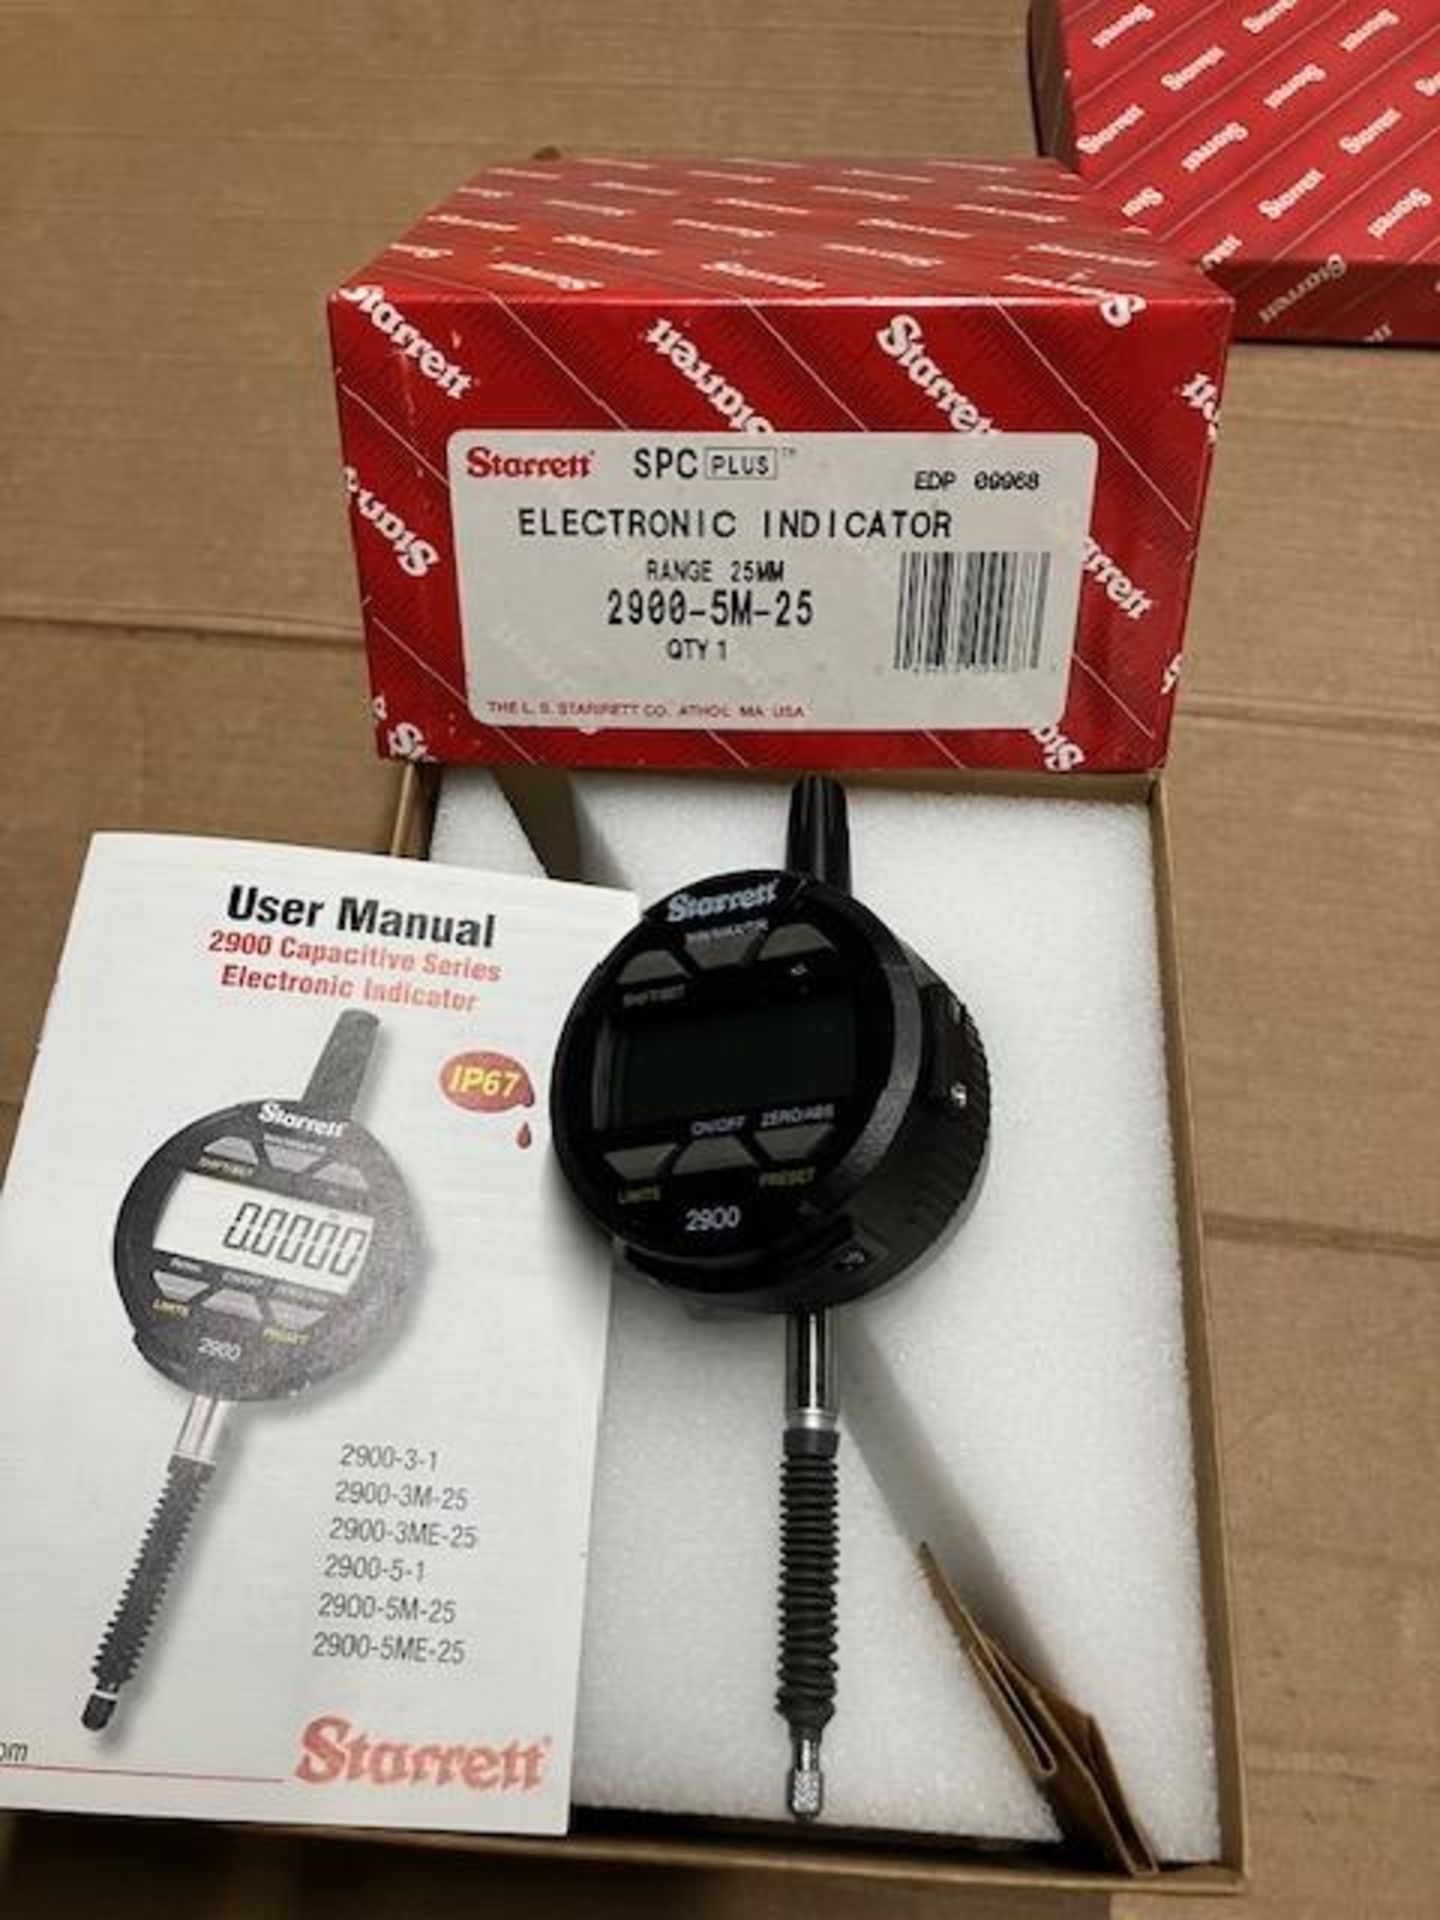 Model 2900-5M-25 Electronic Indicator. IP67 Protection. SPC Output. Range 25mm/1". Reolution 0.01mm/